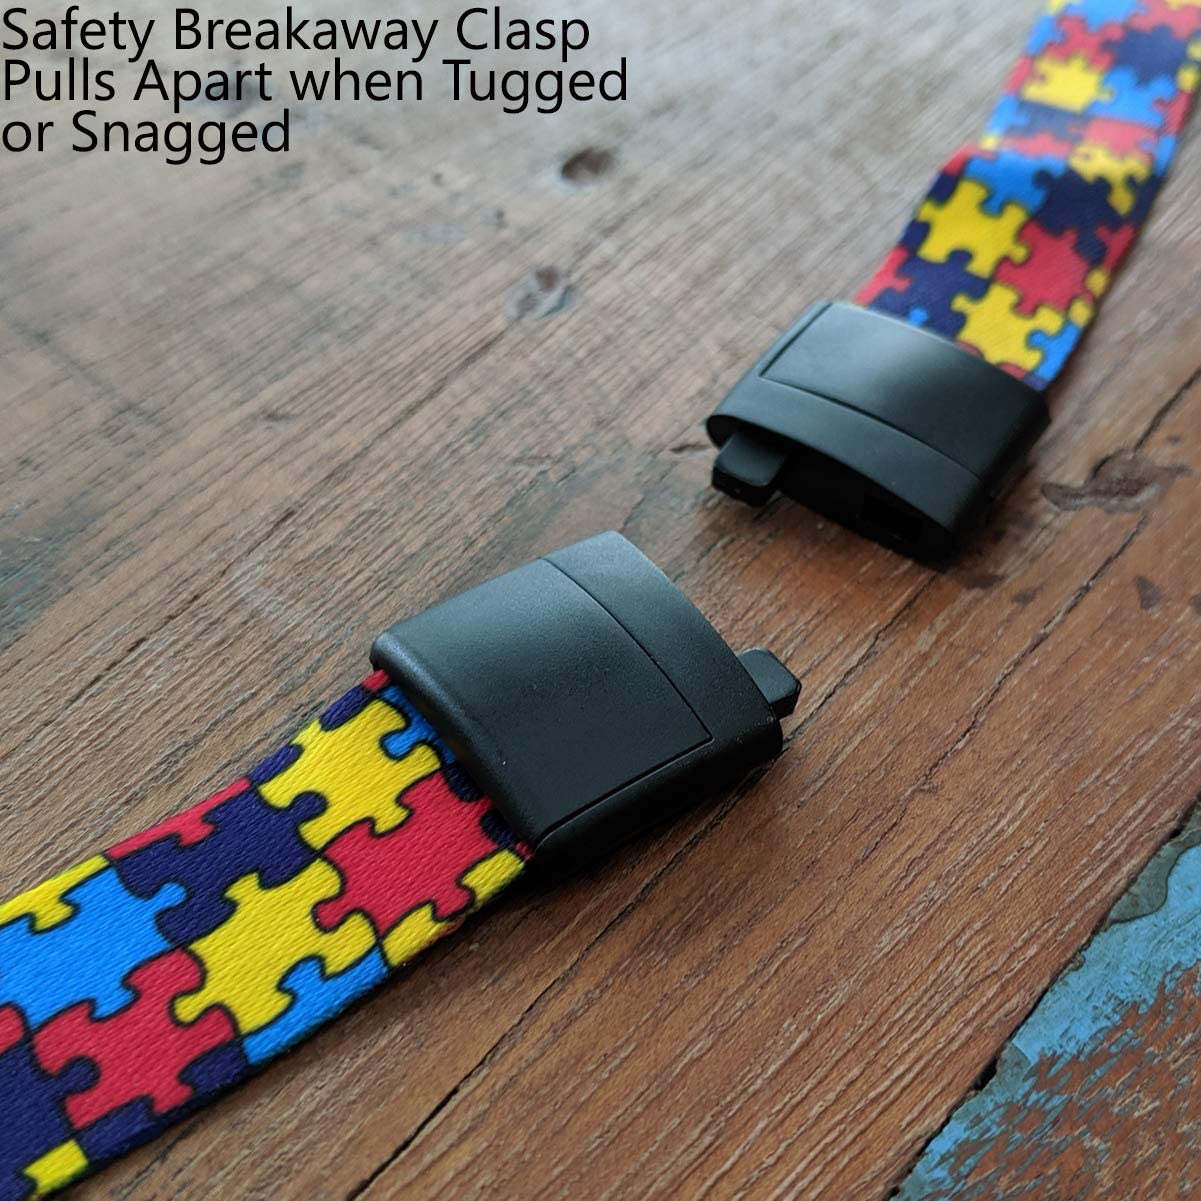 Close-up of a safety breakaway clasp on an Autism Awareness Flat Breakaway Lanyard With Swivel Hook (2138-5281, 2138-5282), showing two detached ends of a colorful puzzle-patterned band on a wooden surface. Text indicates the clasp pulls apart when tugged or snagged.